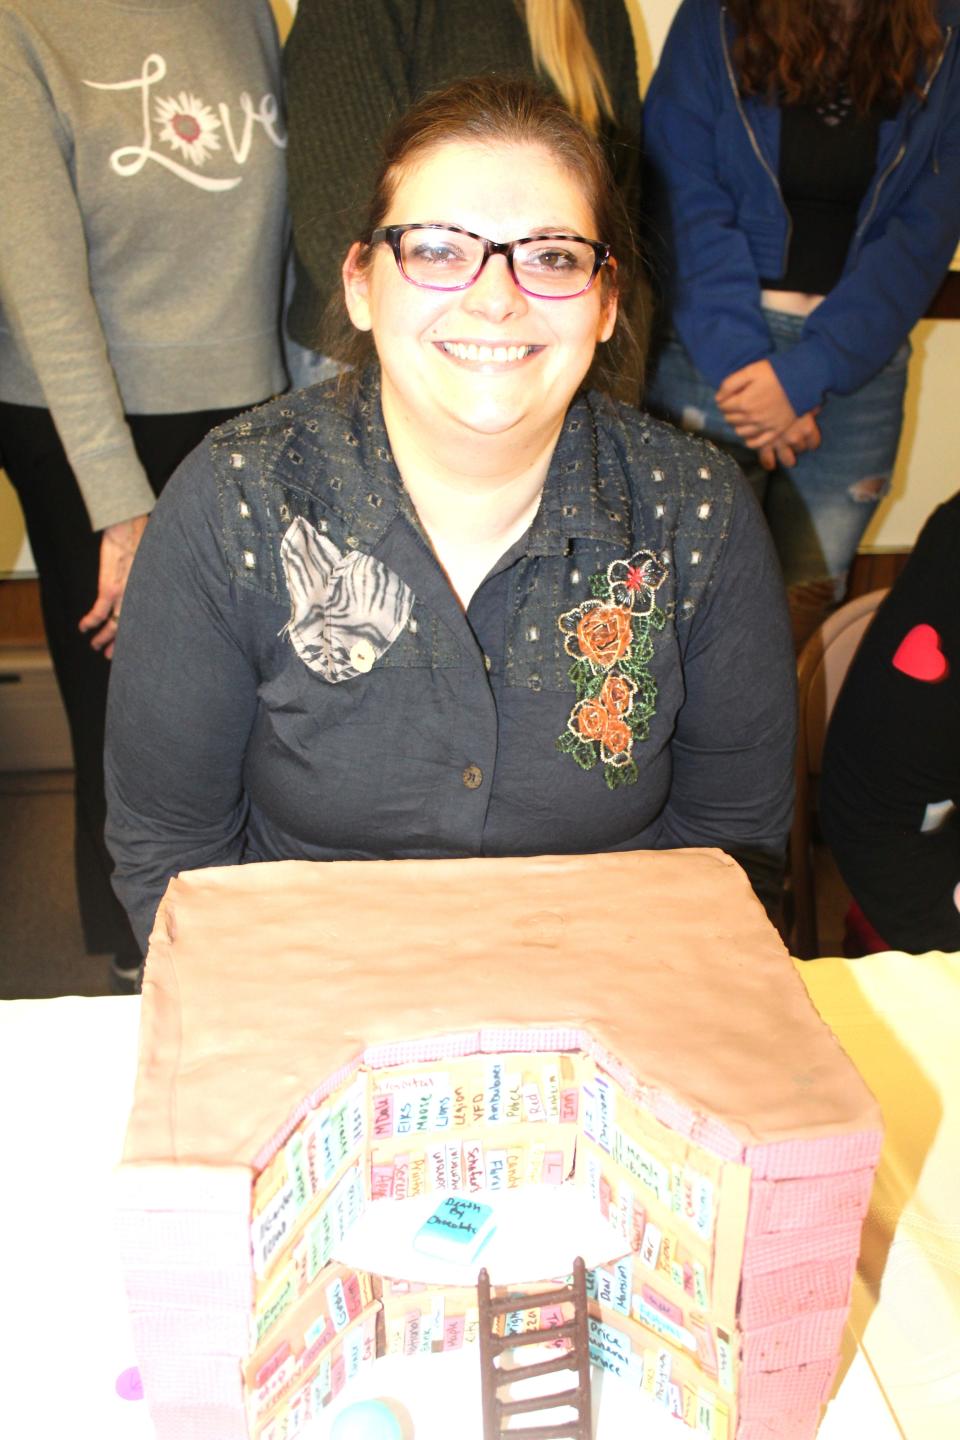 Miranda Durst's first-place tie cake called "OMG. It's a Library Cake" was sold for $190 to Glenda Shultz at the Death By Chocolate event in Meyersdale on Friday evening.